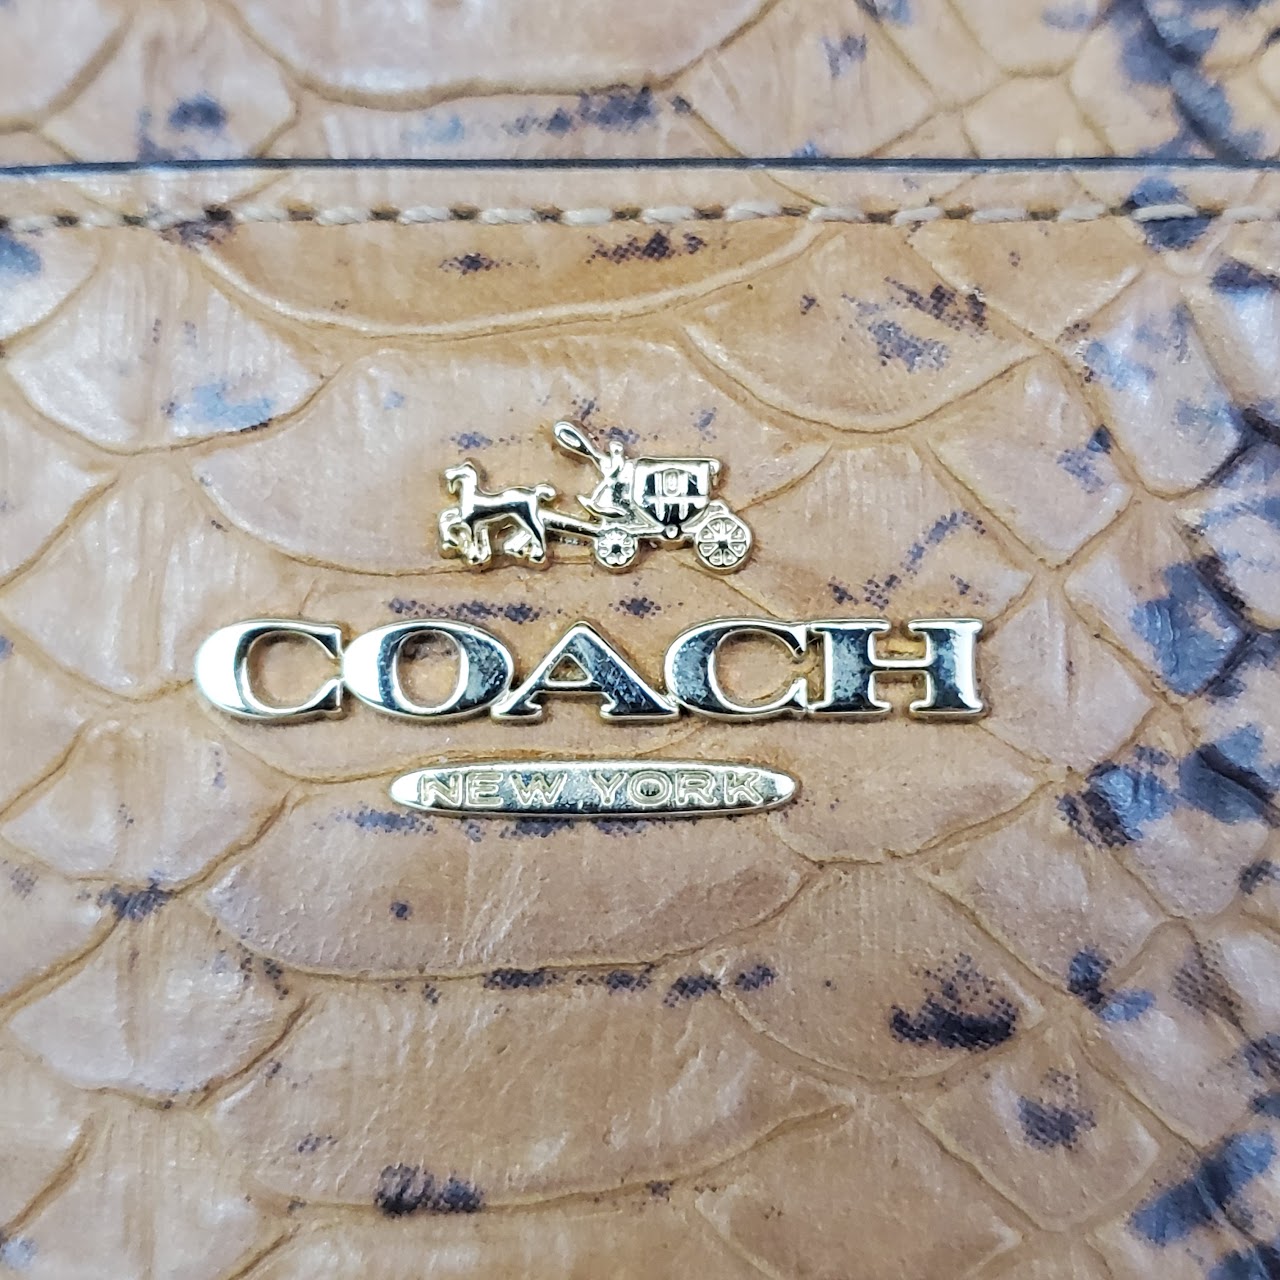 Coach Snake Embossed Dome Top Satchel